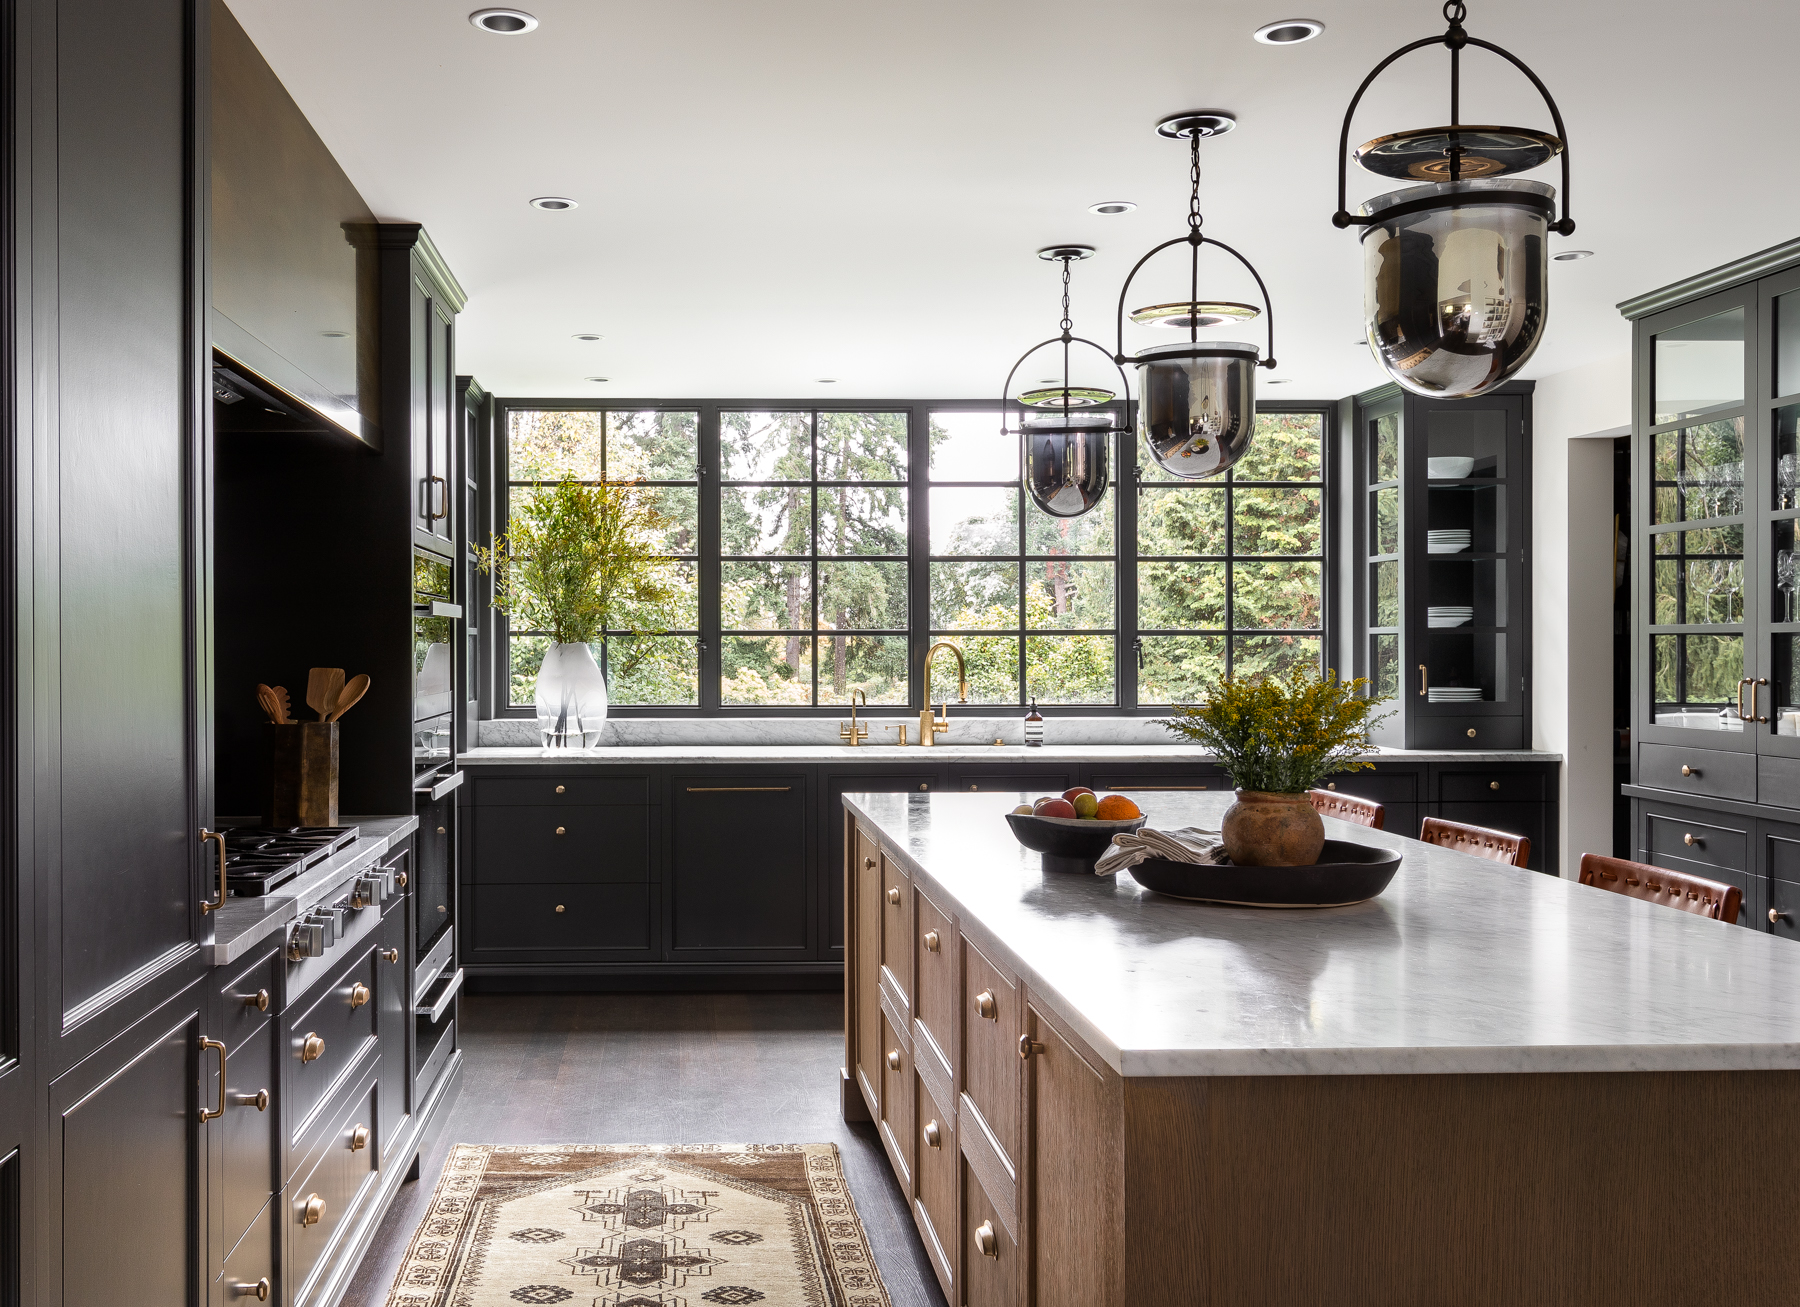 Kitchen featuring a wall of windows above the sink, cool dark gray cabinets, accented oak cabinets, and brass hardware.